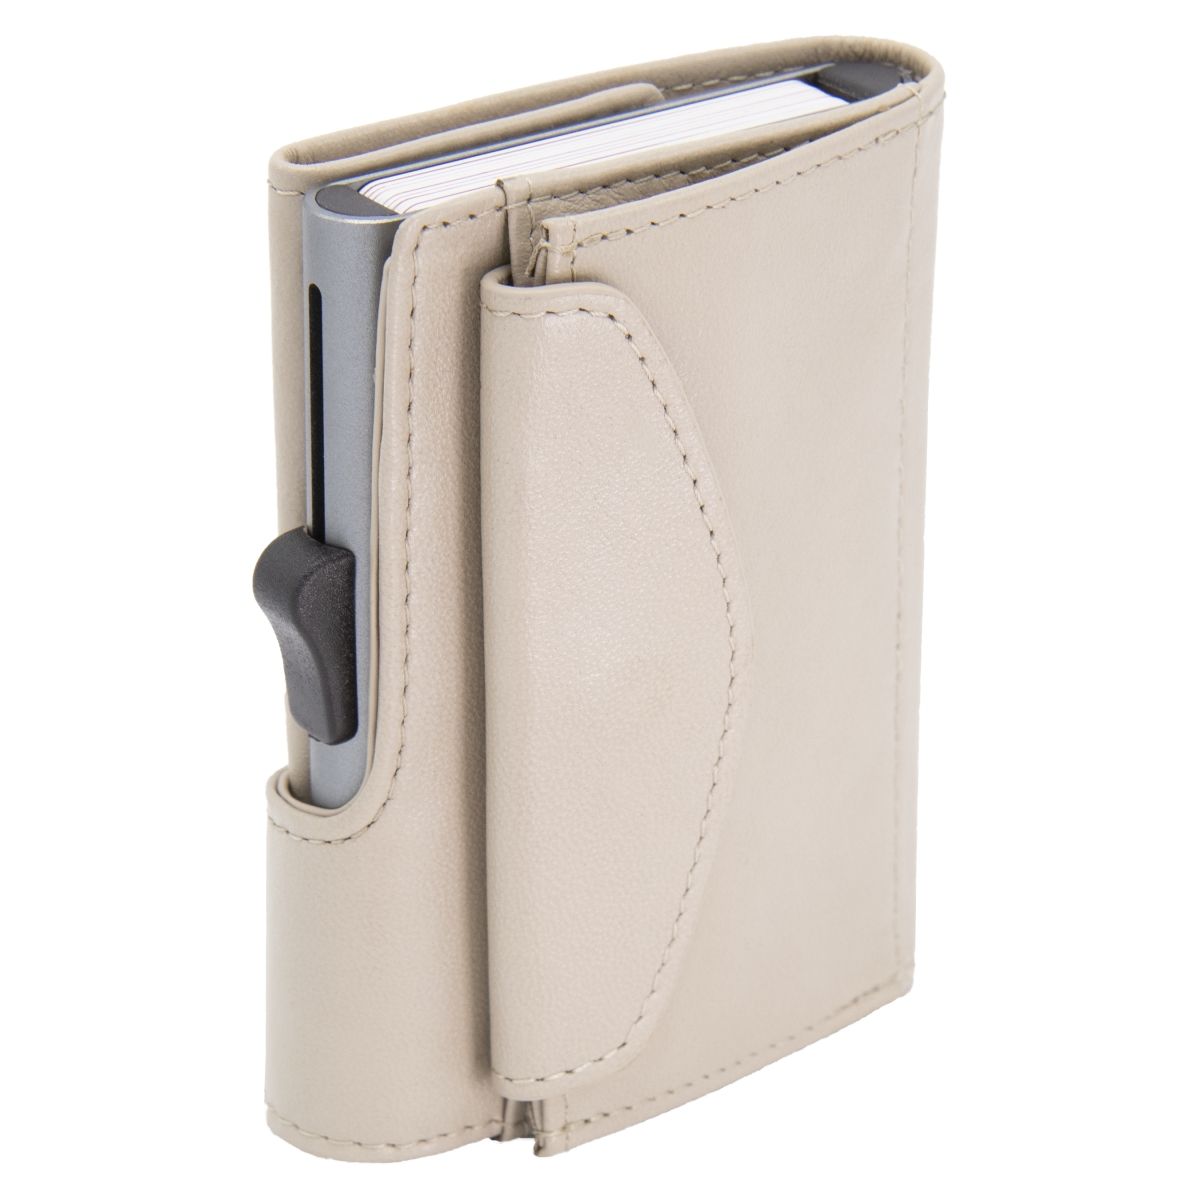 C-Secure XL Aluminum Wallet with Genuine Leather and Coins Pocket - Off White